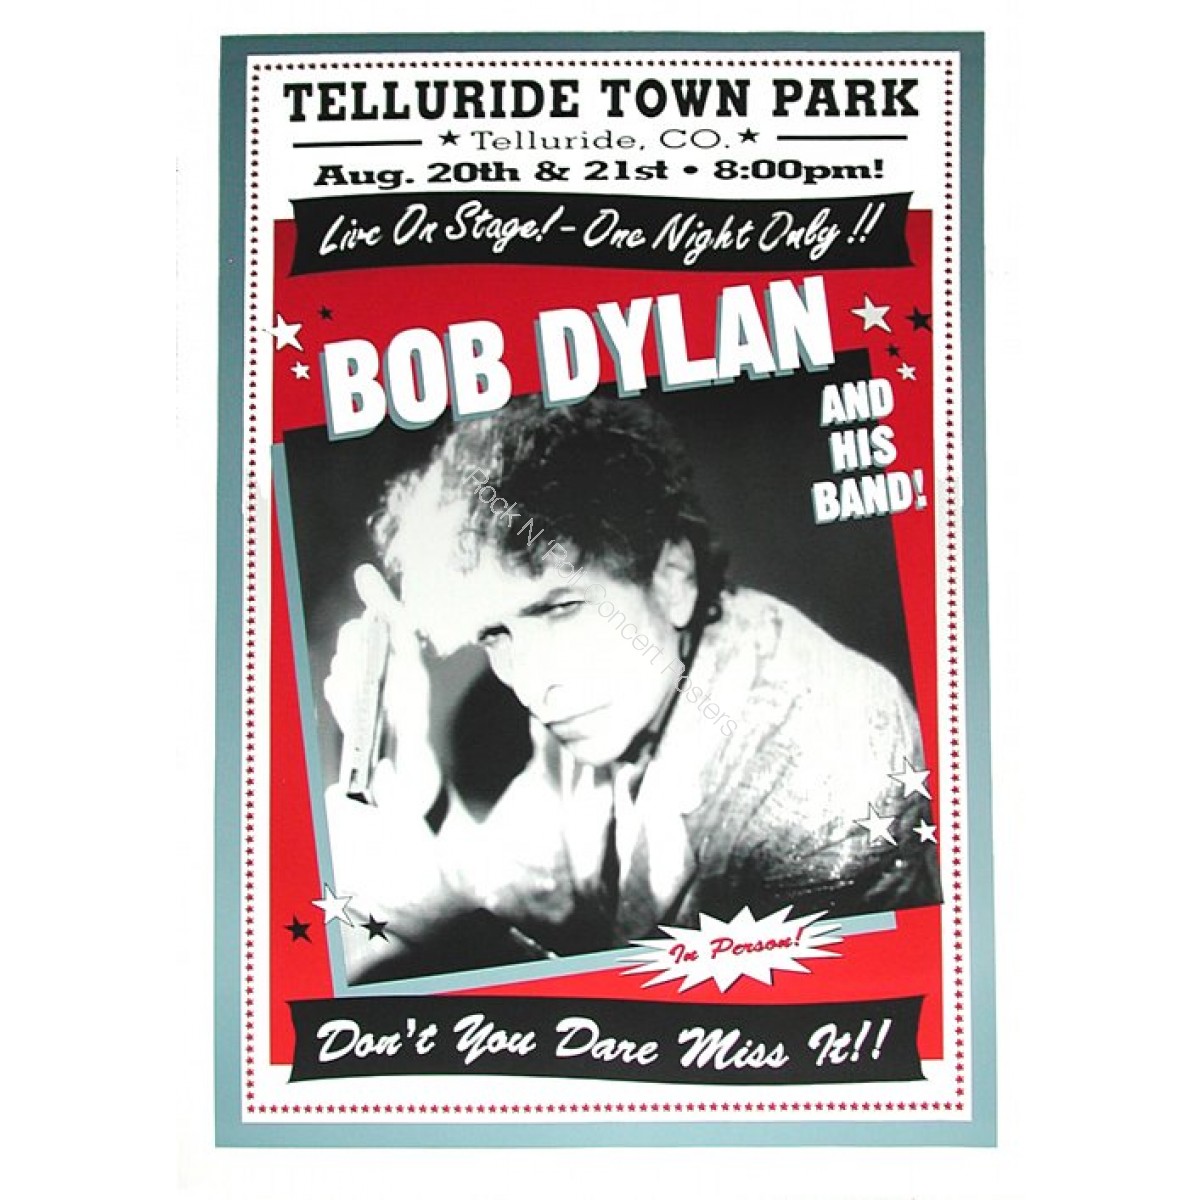 Bob Dylan @ Telluride Town Park Poster August 20th & 21st 2001 Blue Variant